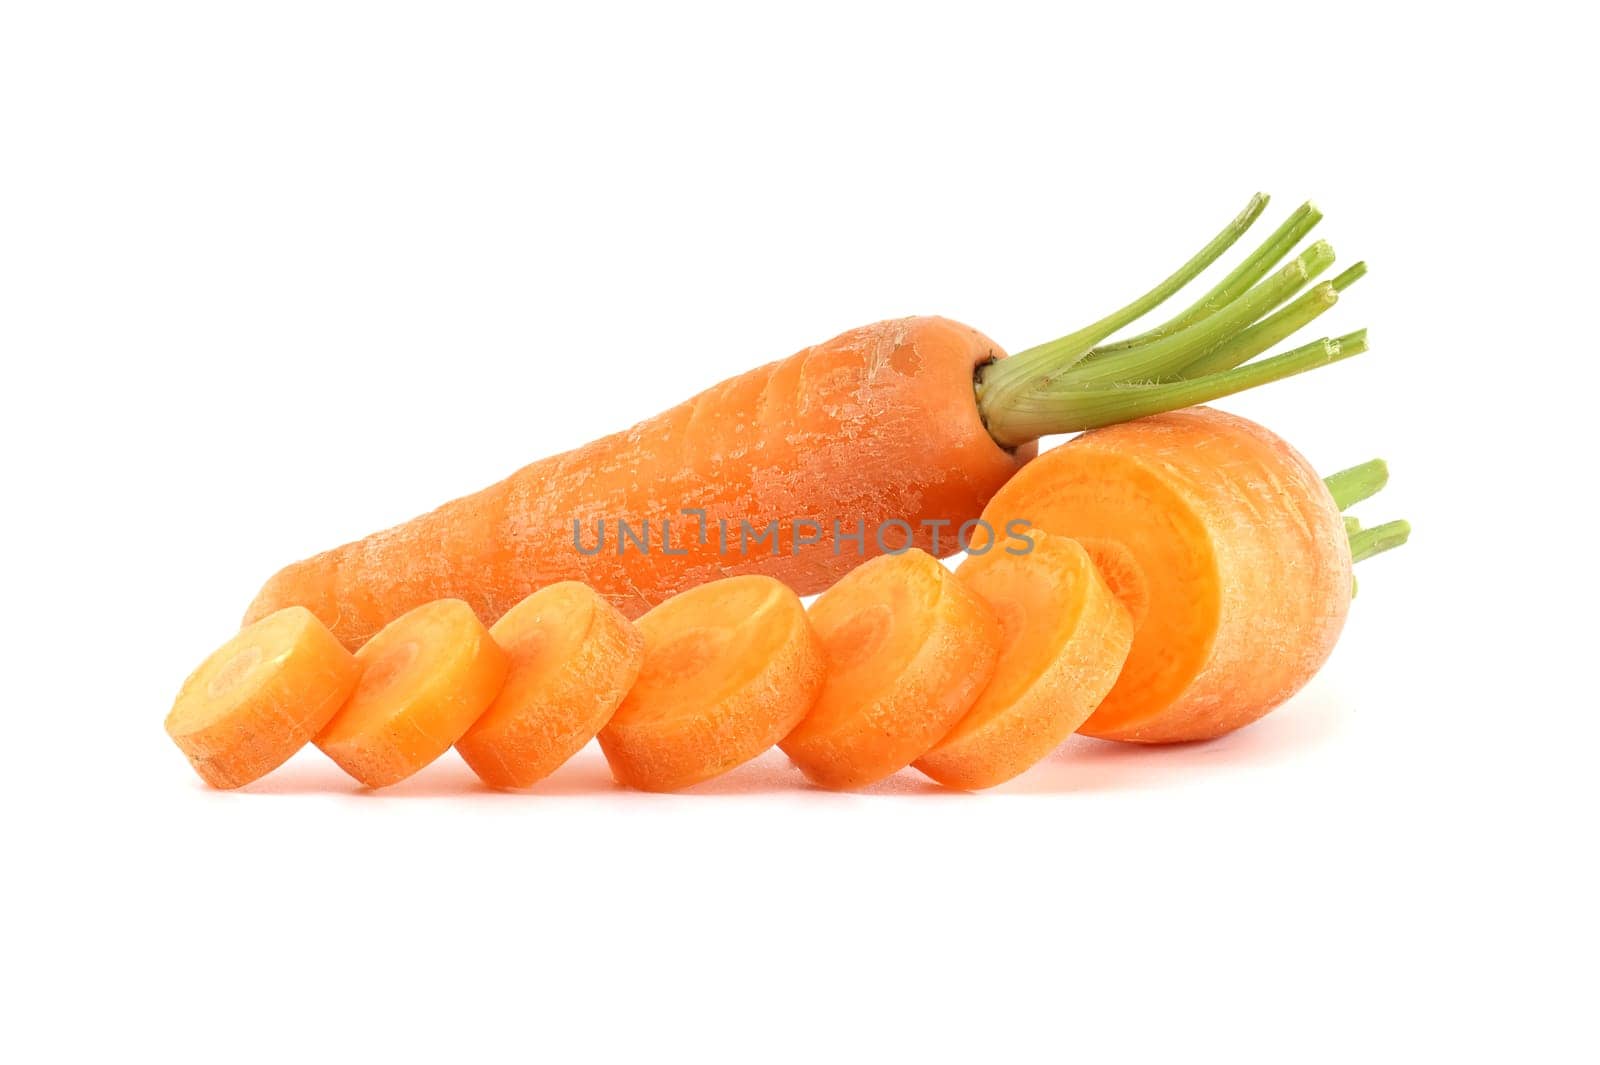 Whole carrot and its sliced pieces isolated against a white background by NetPix